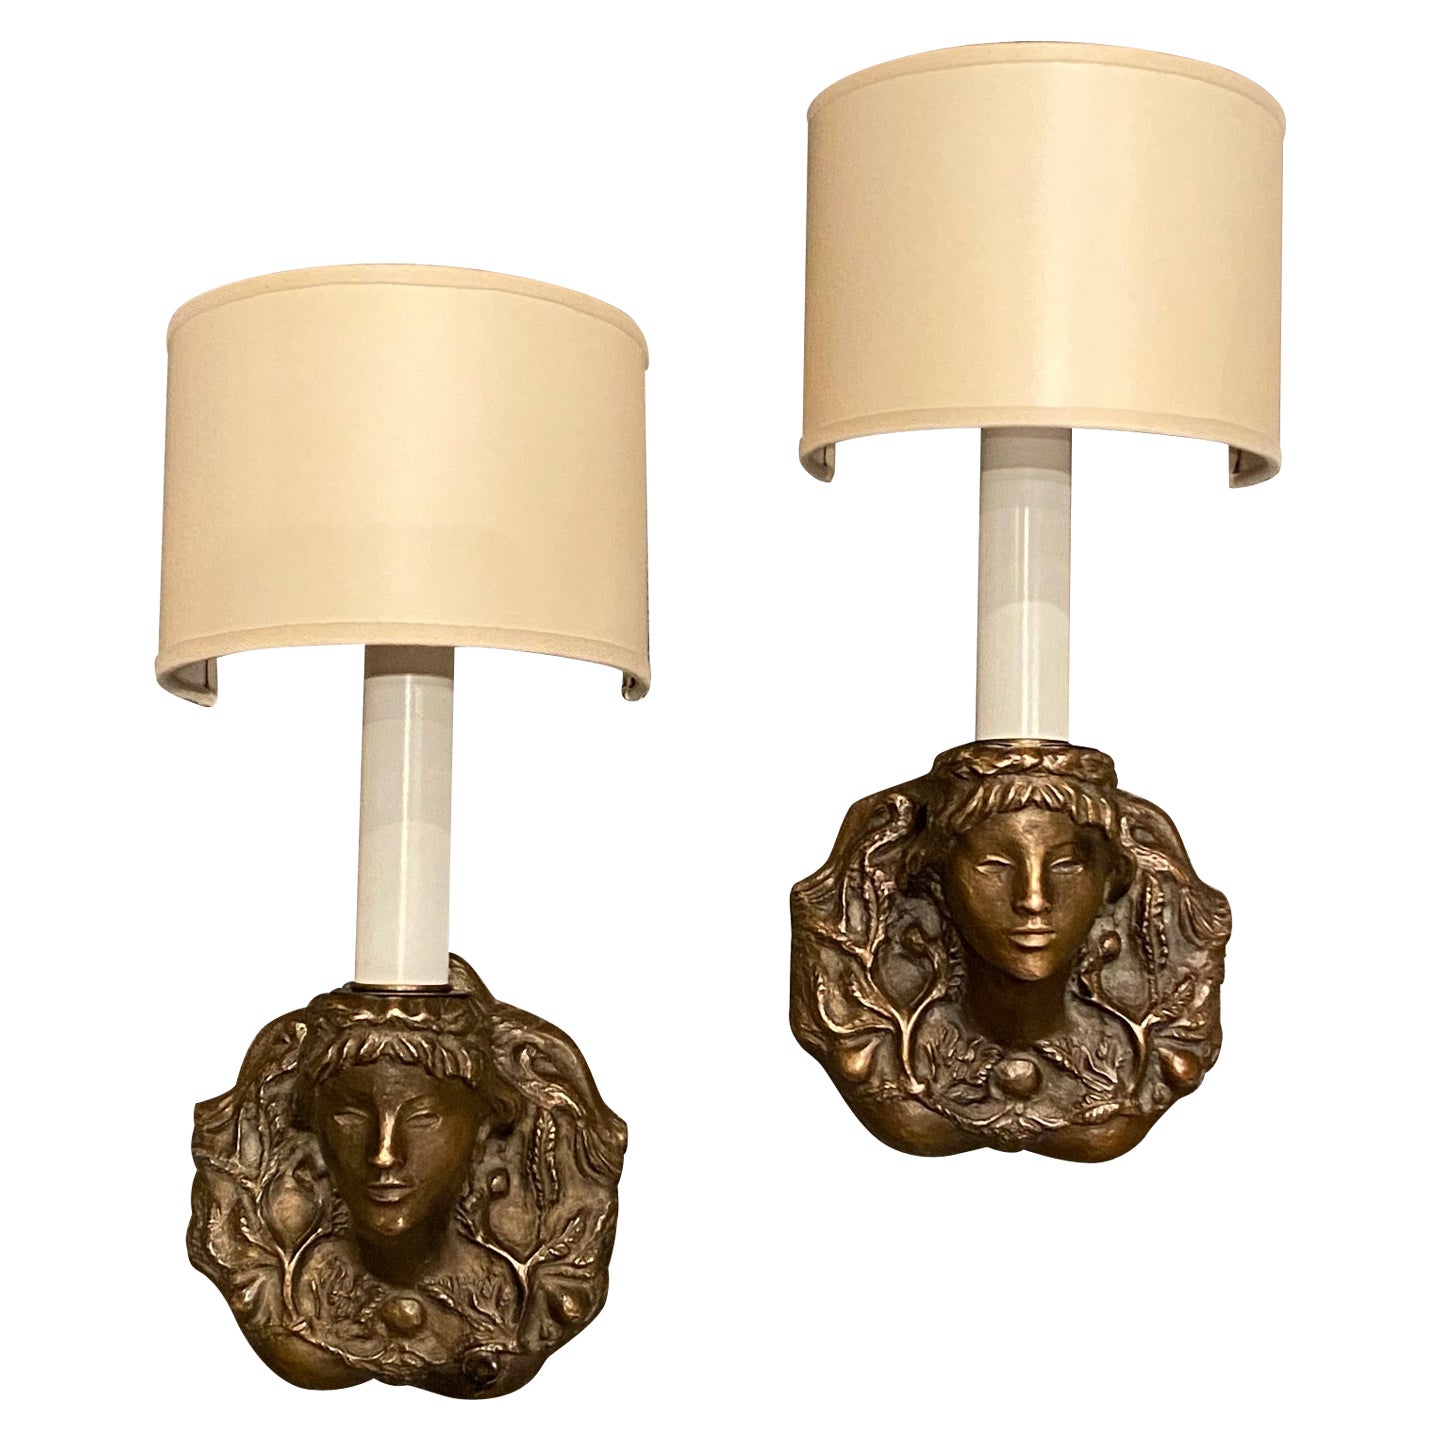 Rare Pair of Solid Bronze Sconces by Vadim Androusov Representing Female Figures